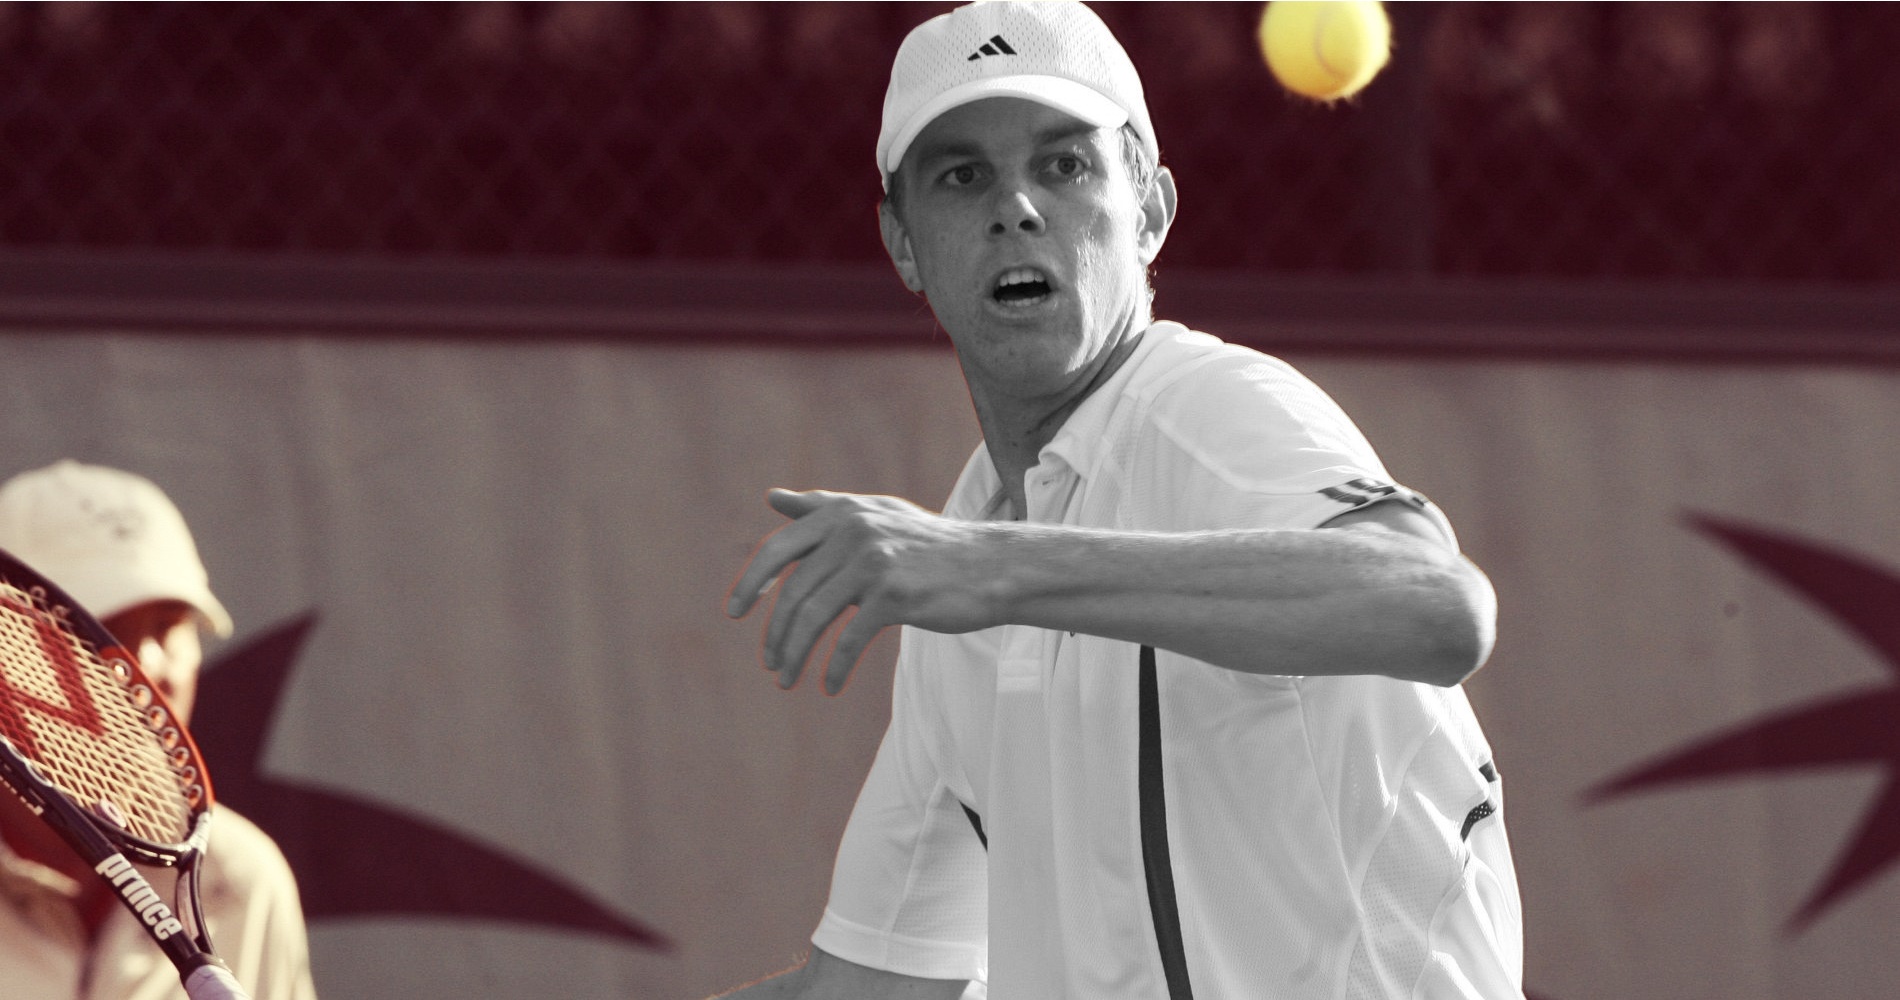 Sam Querrey - 2007 - On this day